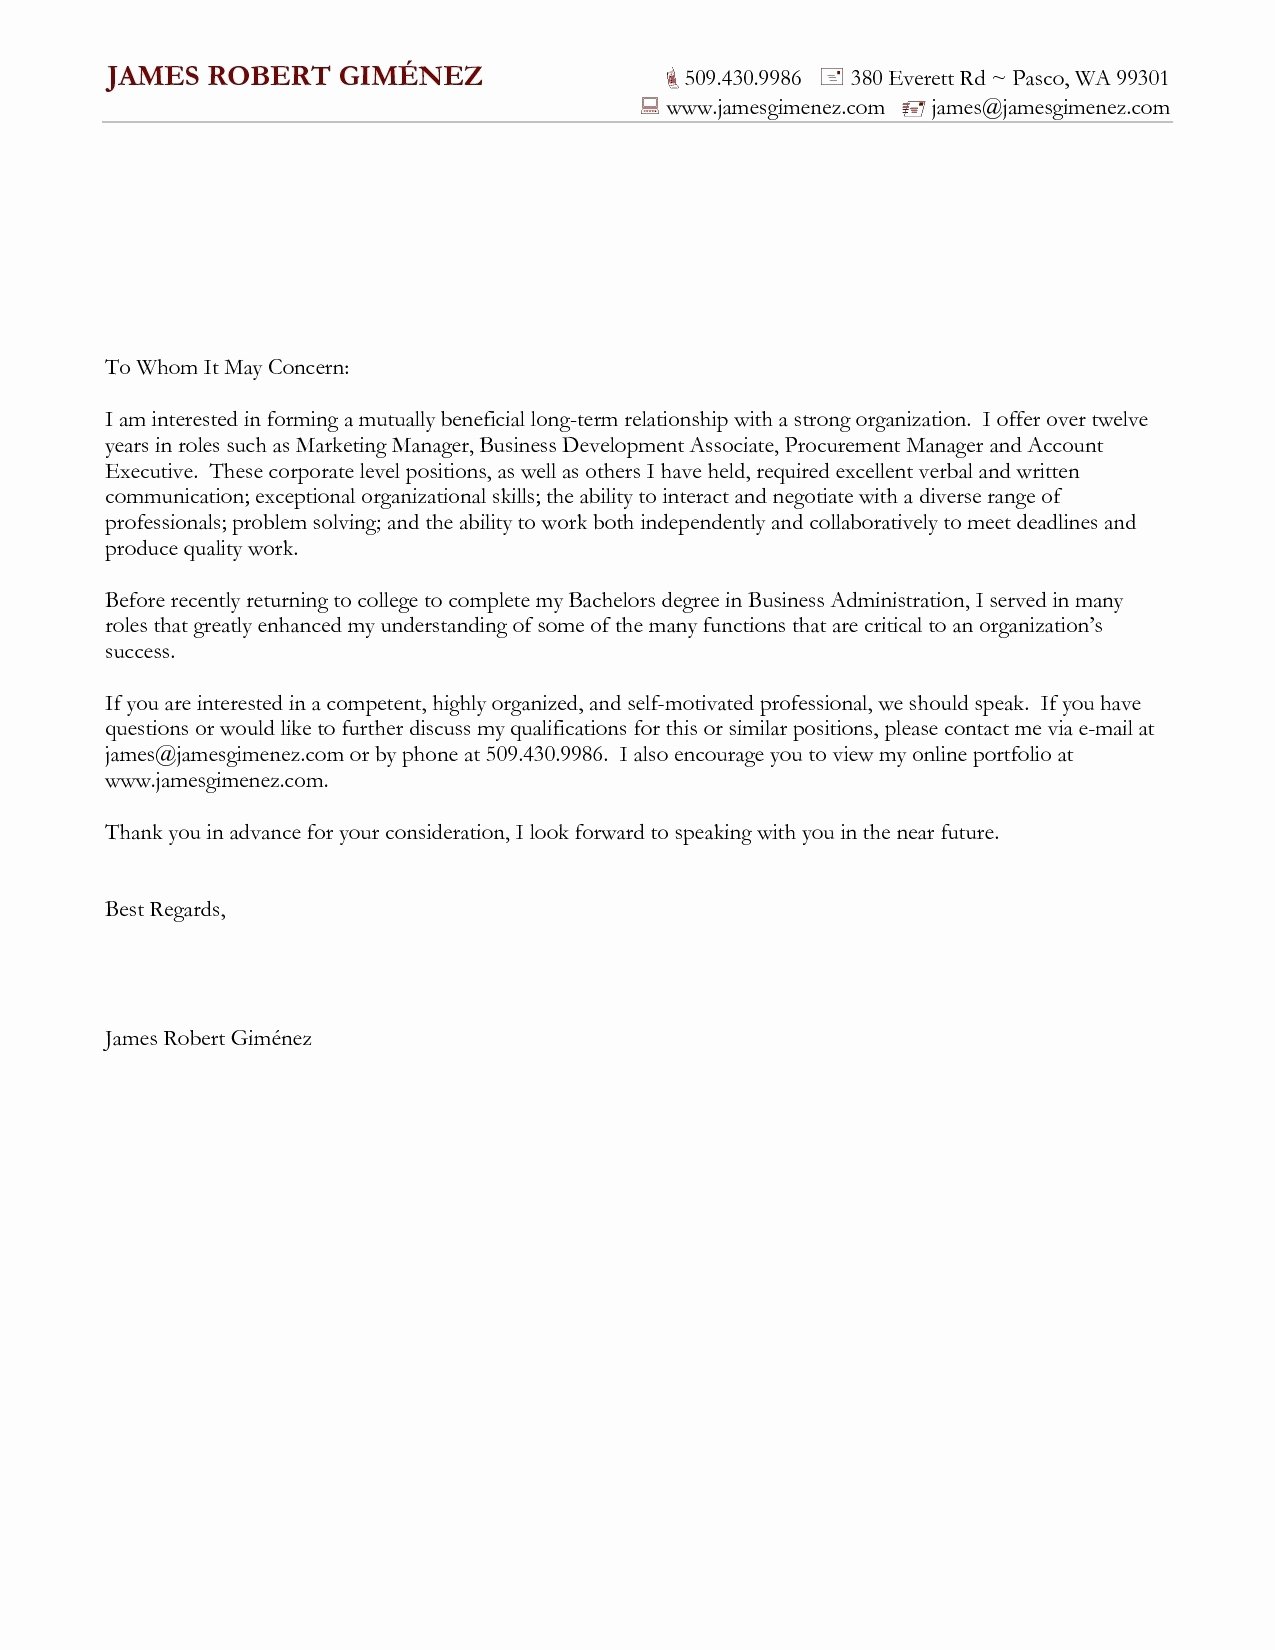 General Cover Letter Sample Awesome General Cover Letter for All Jobs Surf Jobs